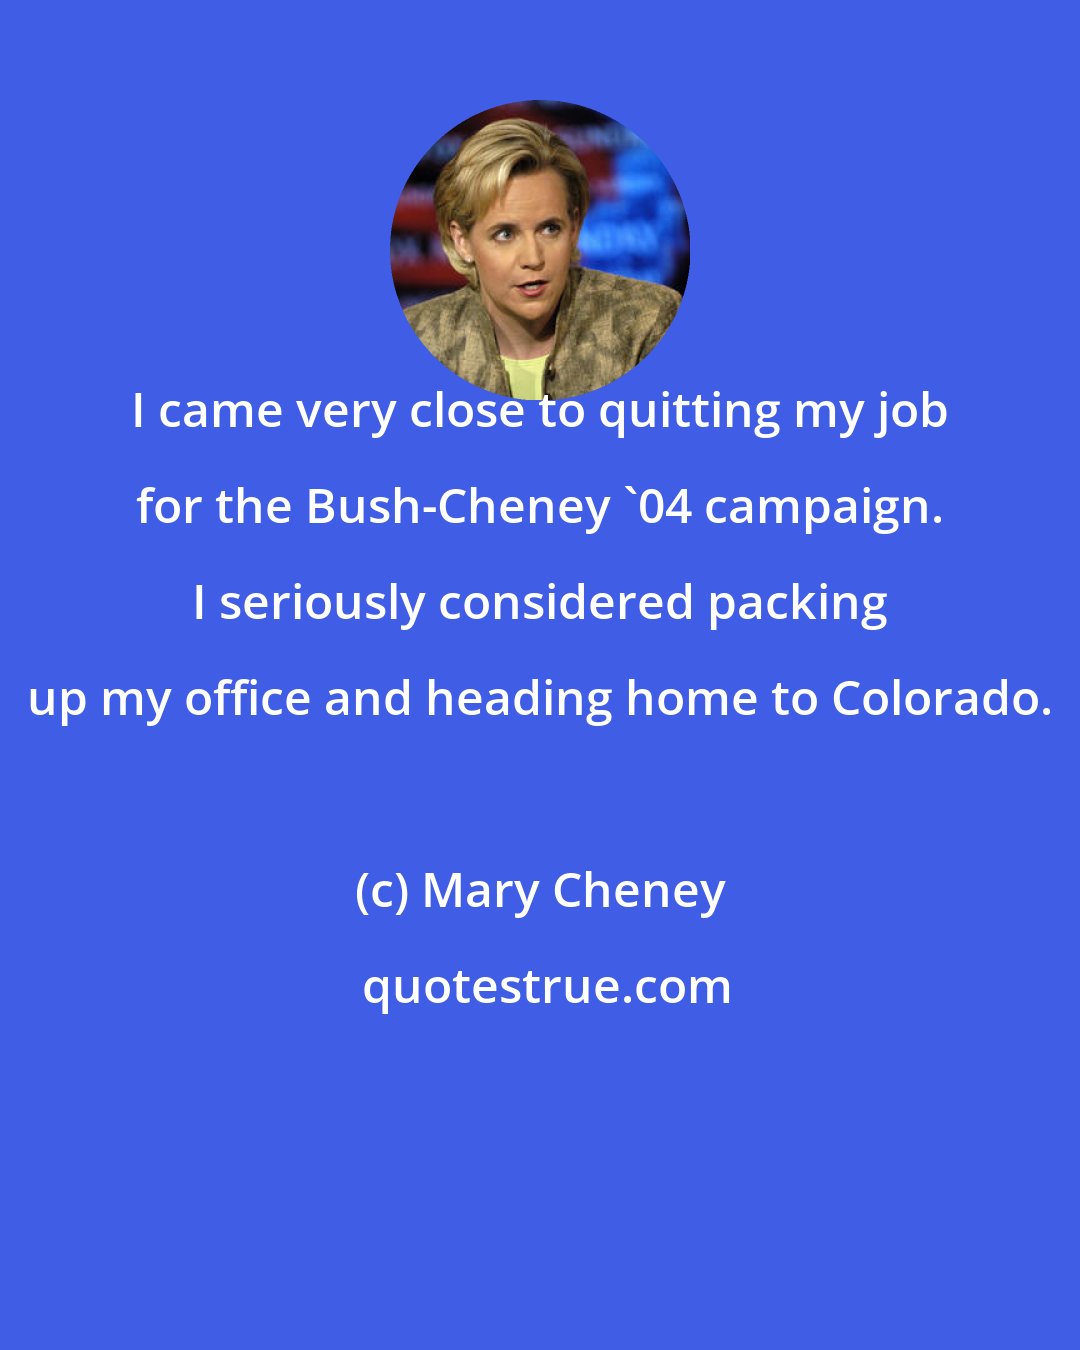 Mary Cheney: I came very close to quitting my job for the Bush-Cheney '04 campaign. I seriously considered packing up my office and heading home to Colorado.